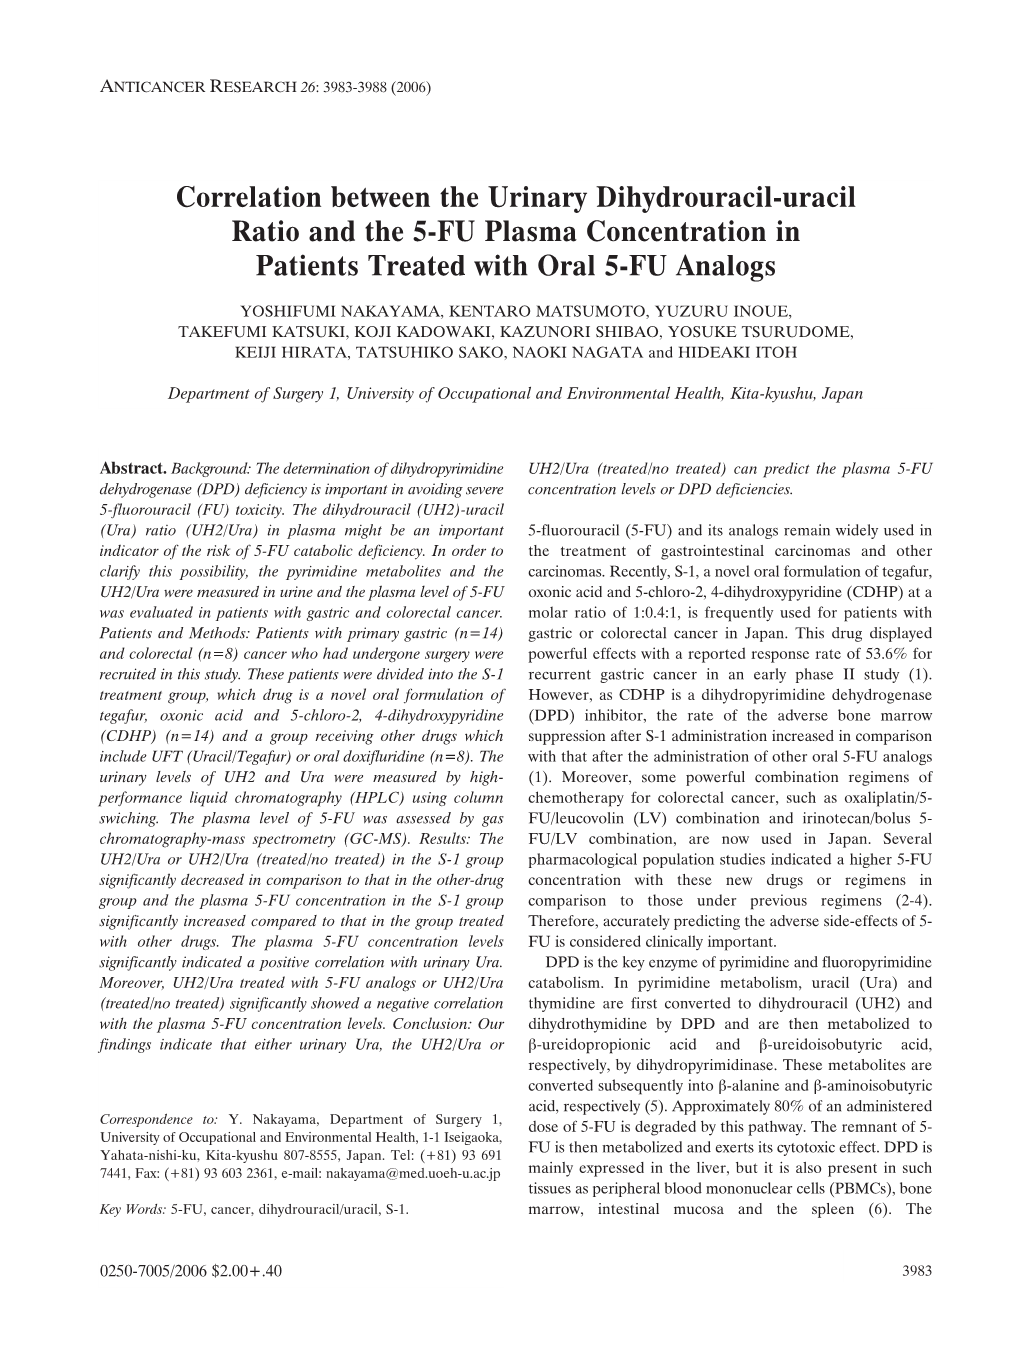 Correlation Between the Urinary Dihydrouracil-Uracil Ratio and the 5-FU Plasma Concentration in Patients Treated with Oral 5-FU Analogs